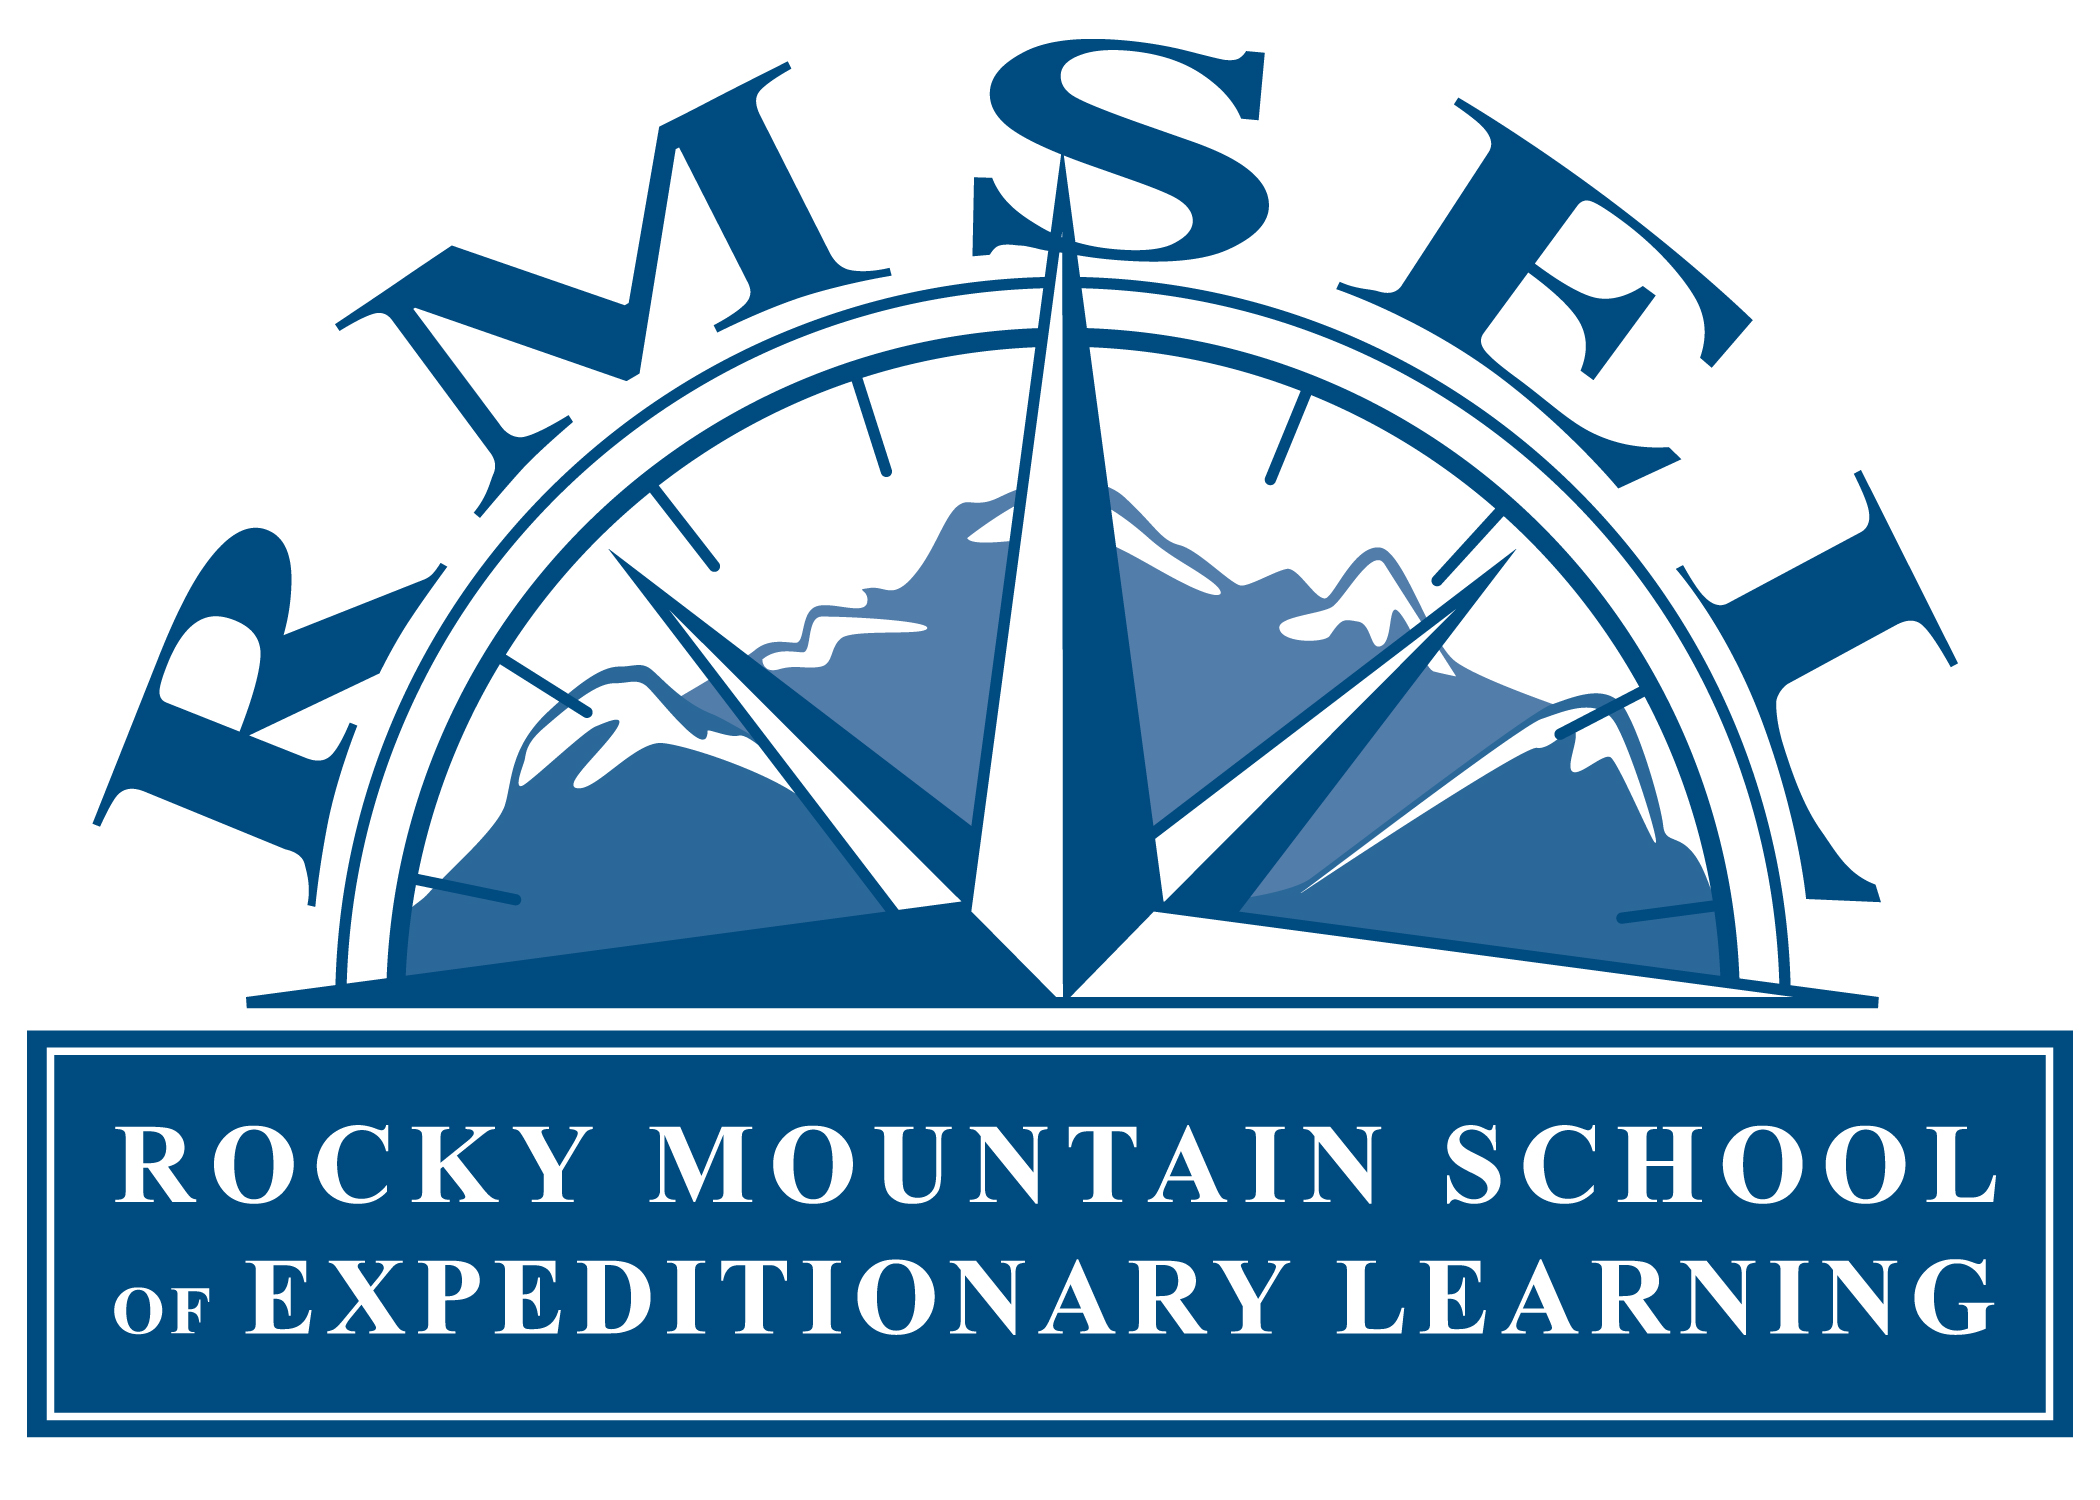 Rocky Mountain School of Expeditionary Learning